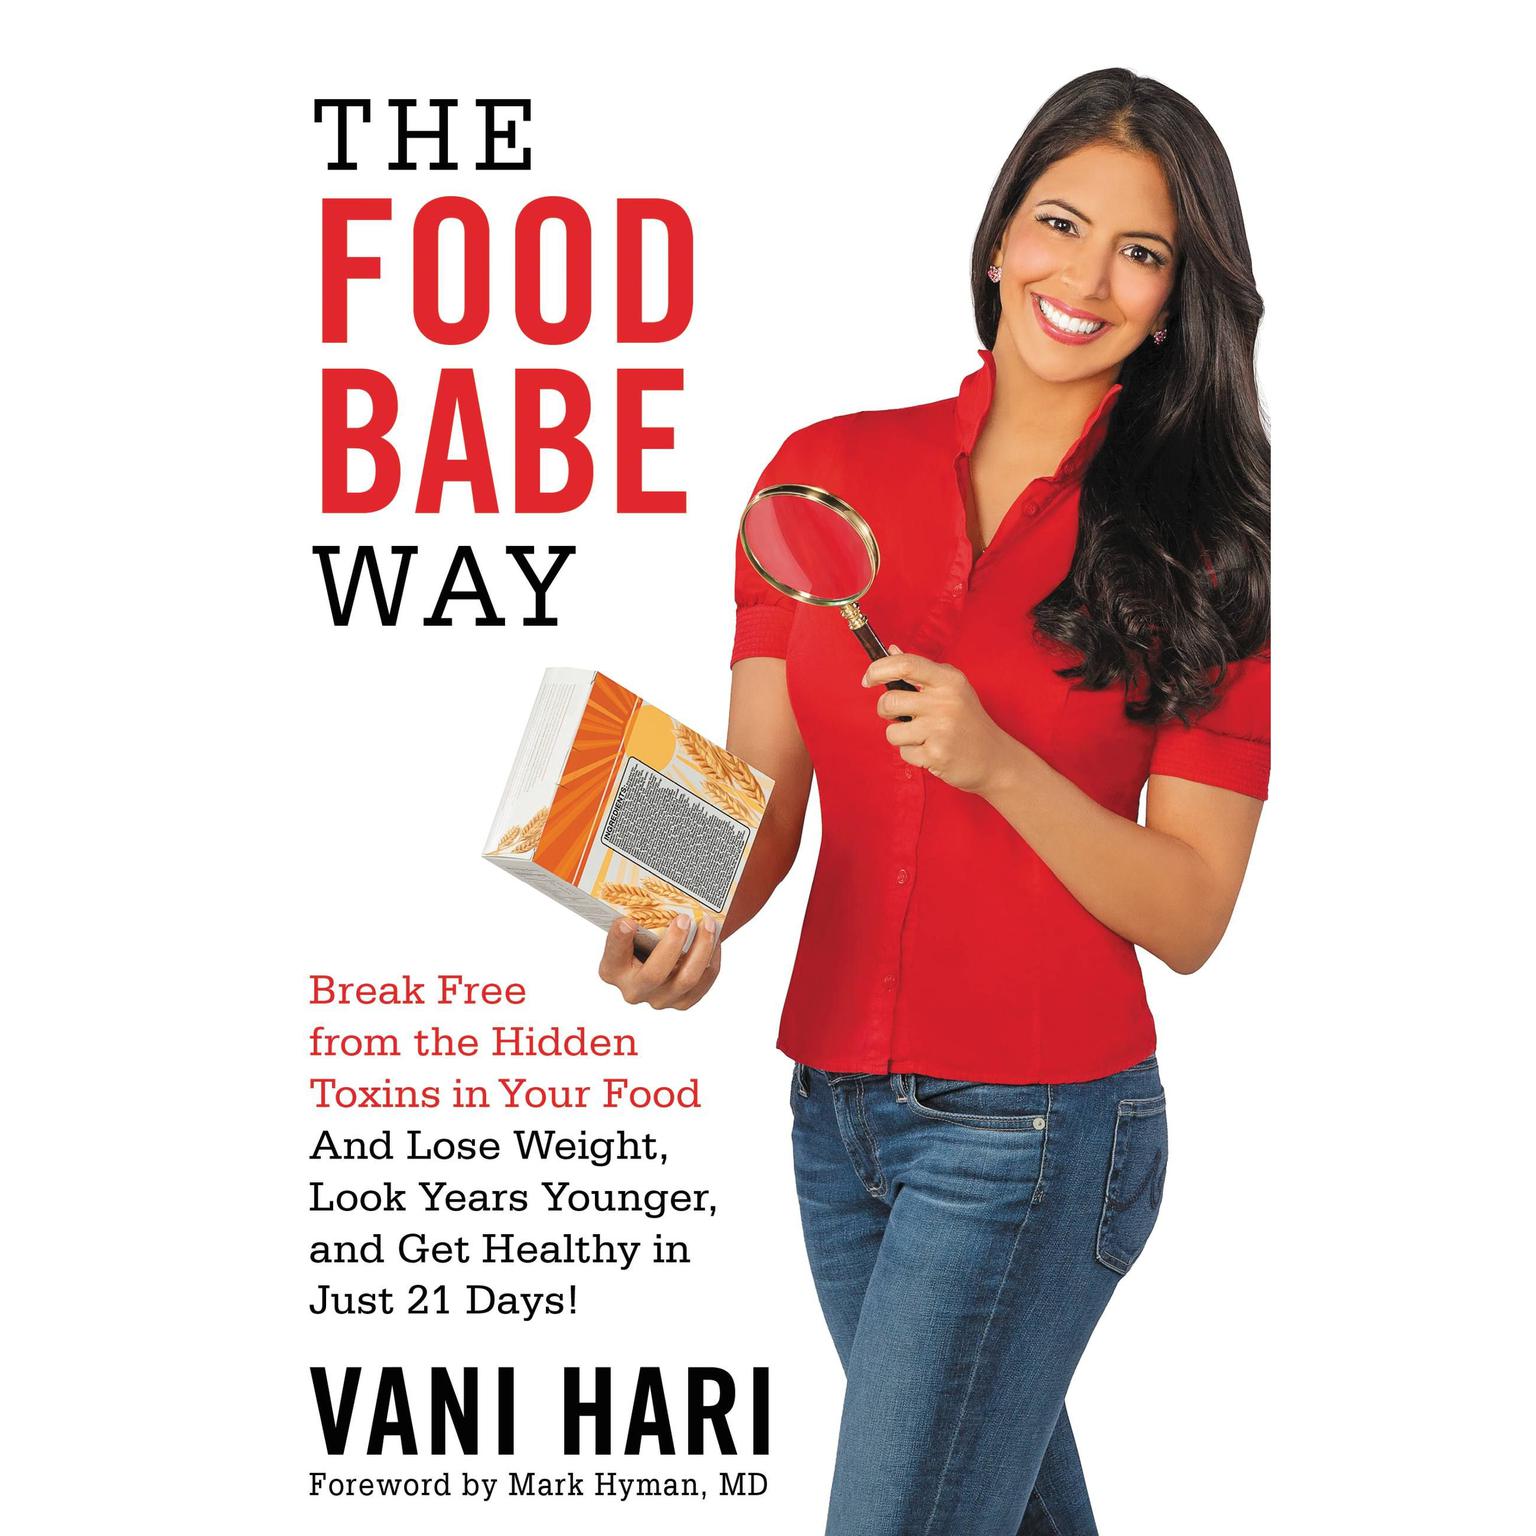 The Food Babe Way: Break Free from the Hidden Toxins in Your Food and Lose Weight, Look Years Younger, and Get Healthy in Just 21 Days! Audiobook, by Vani Hari